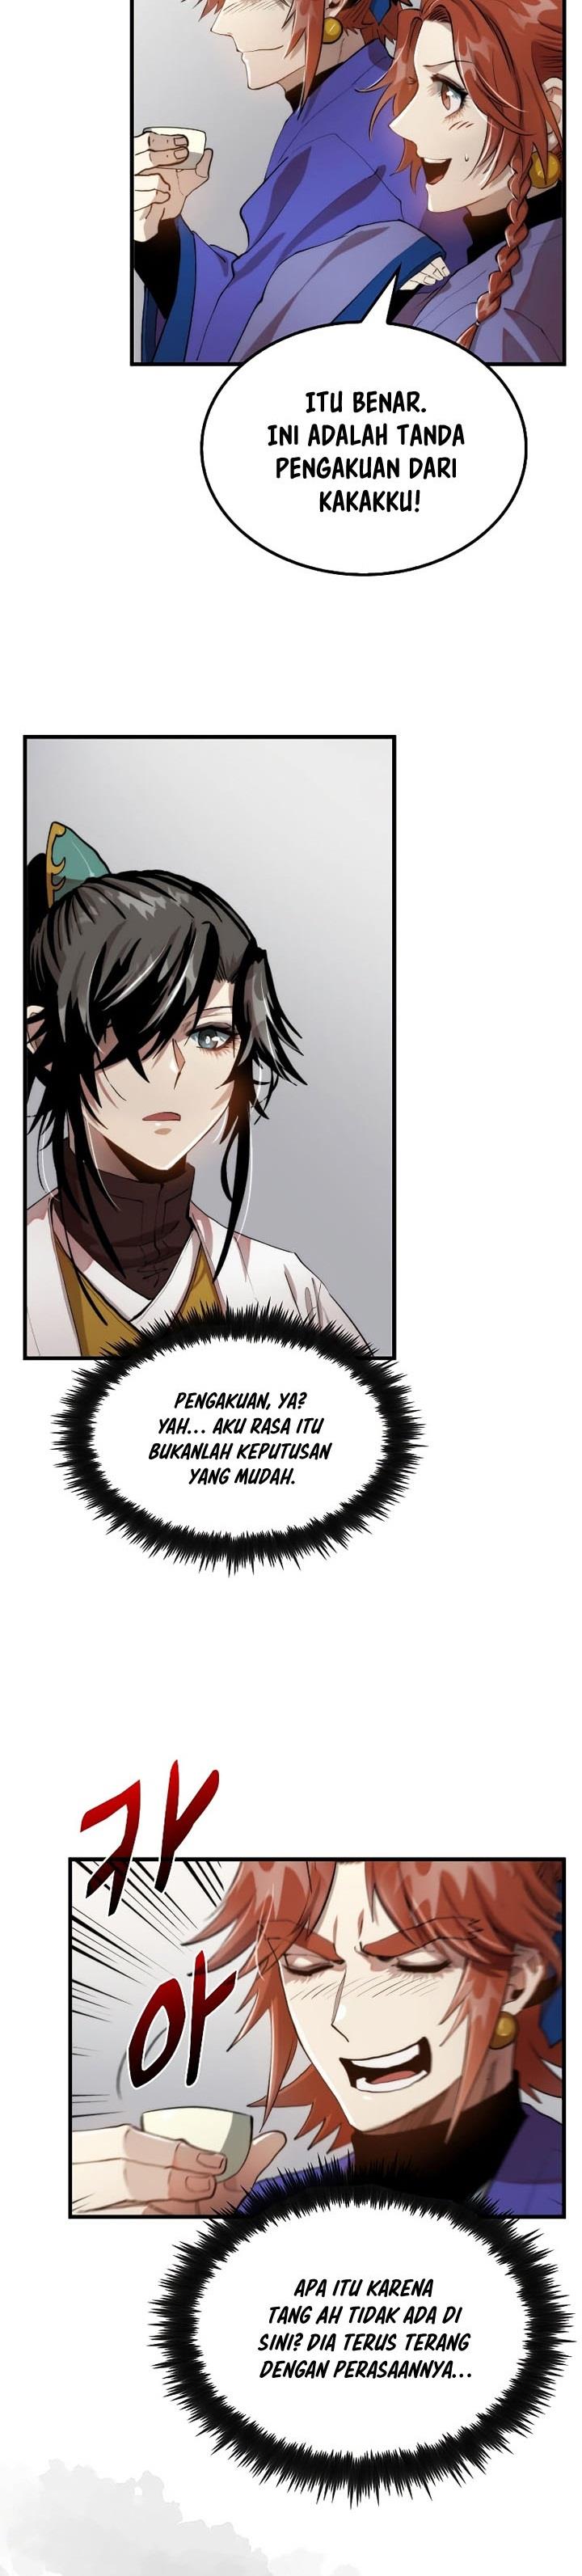 Doctor’s Rebirth Chapter 97